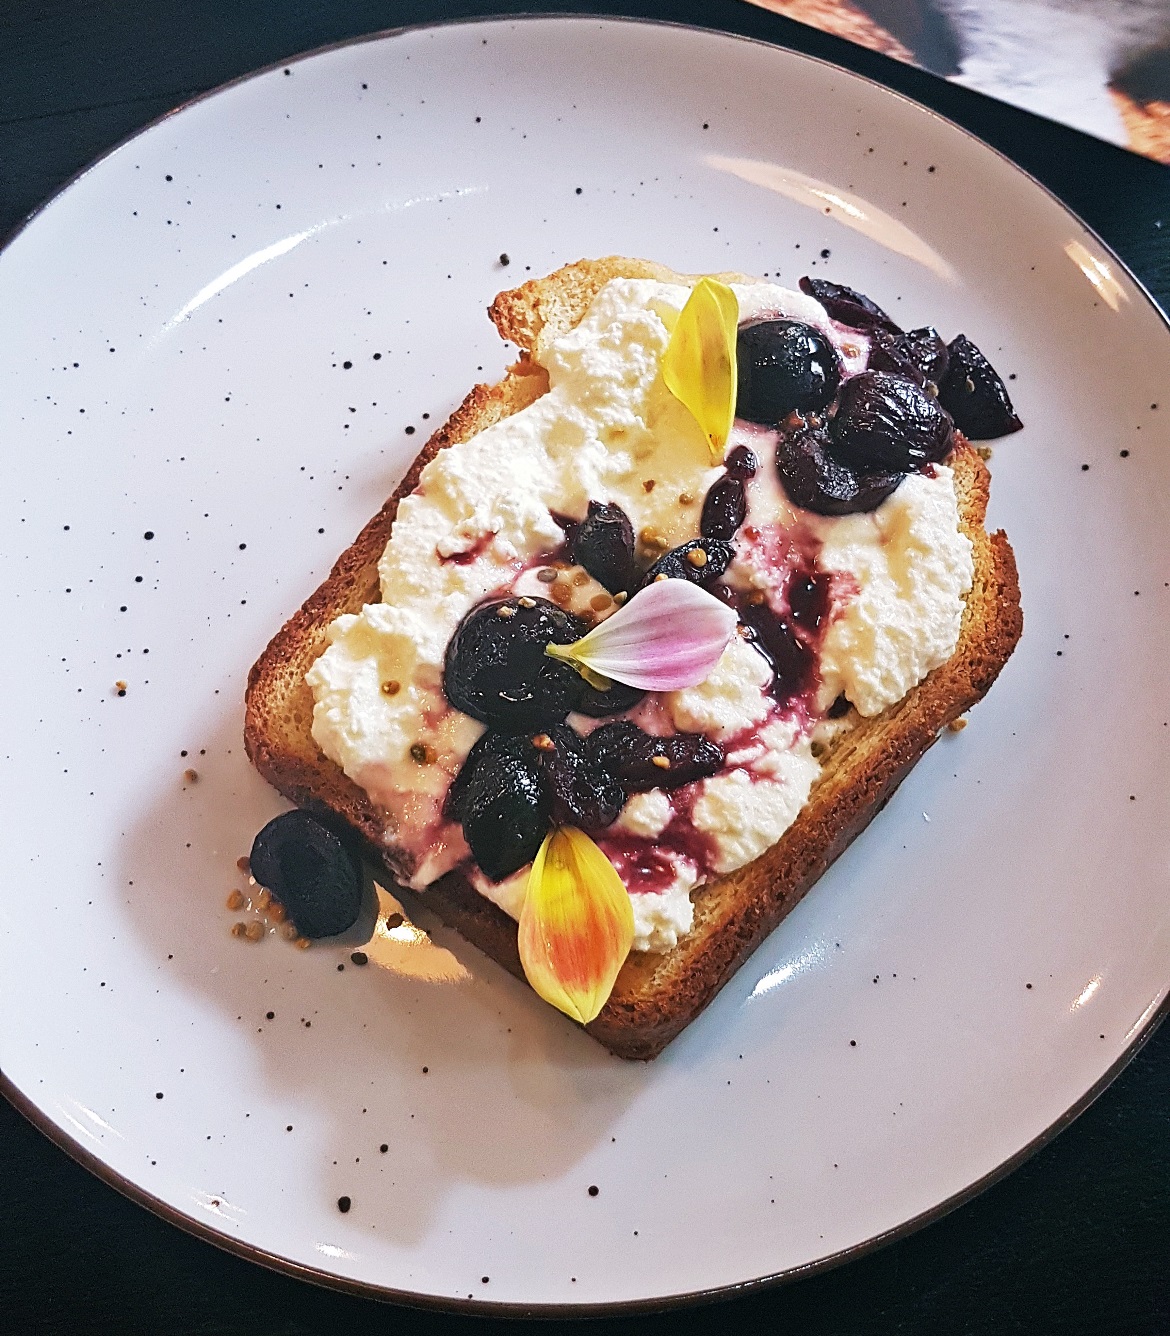 Vanilla cherries and ricotta on brioche - Review of North Star Coffee Shop by BeckyBecky Blogs